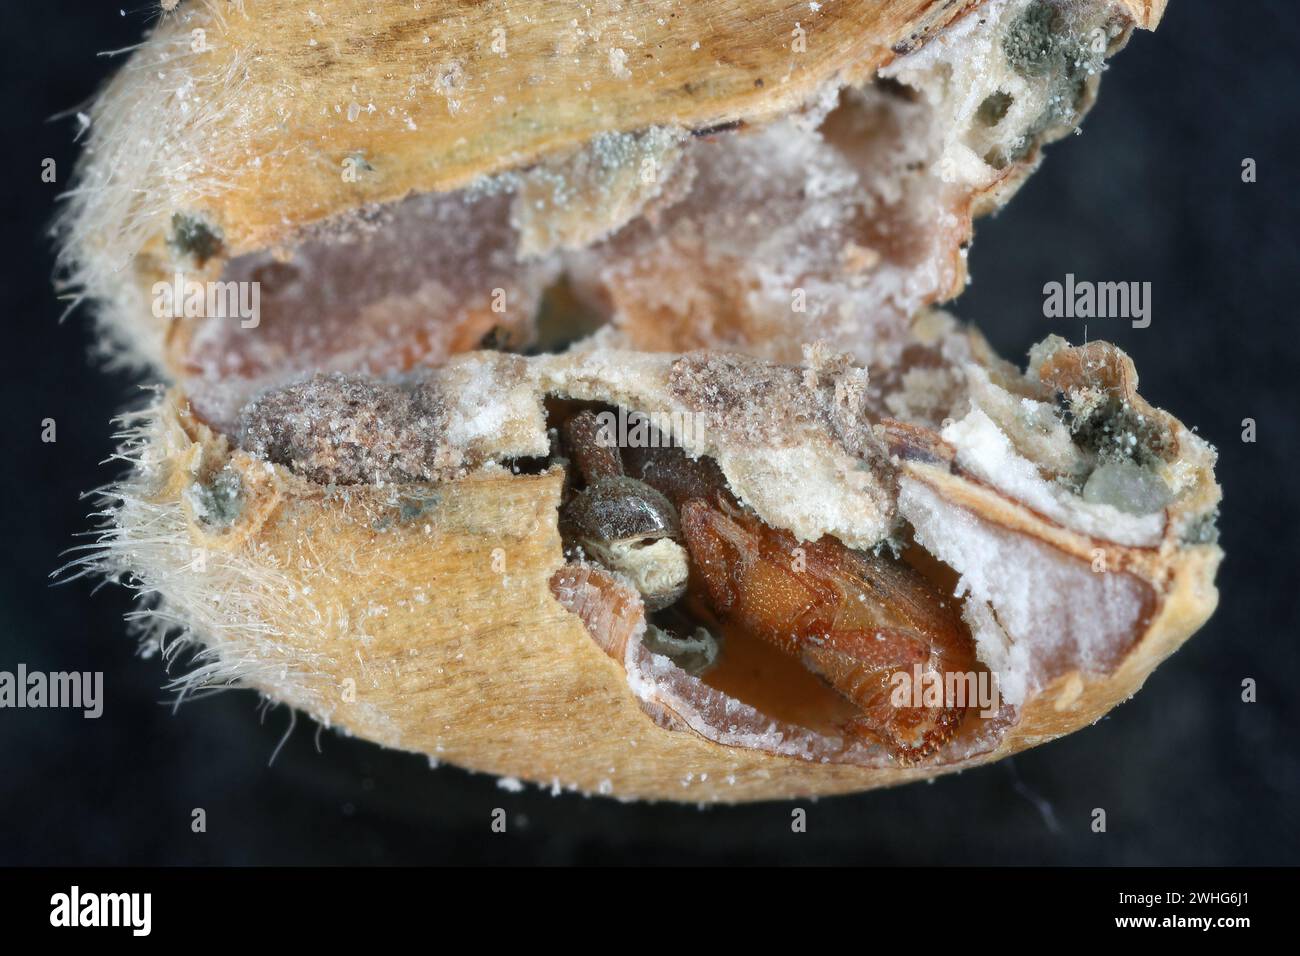 Granary Weevil (Sitophilus granarius) also called Grain or Wheat Weevil. Young beetle developing inside the grain. Stock Photo